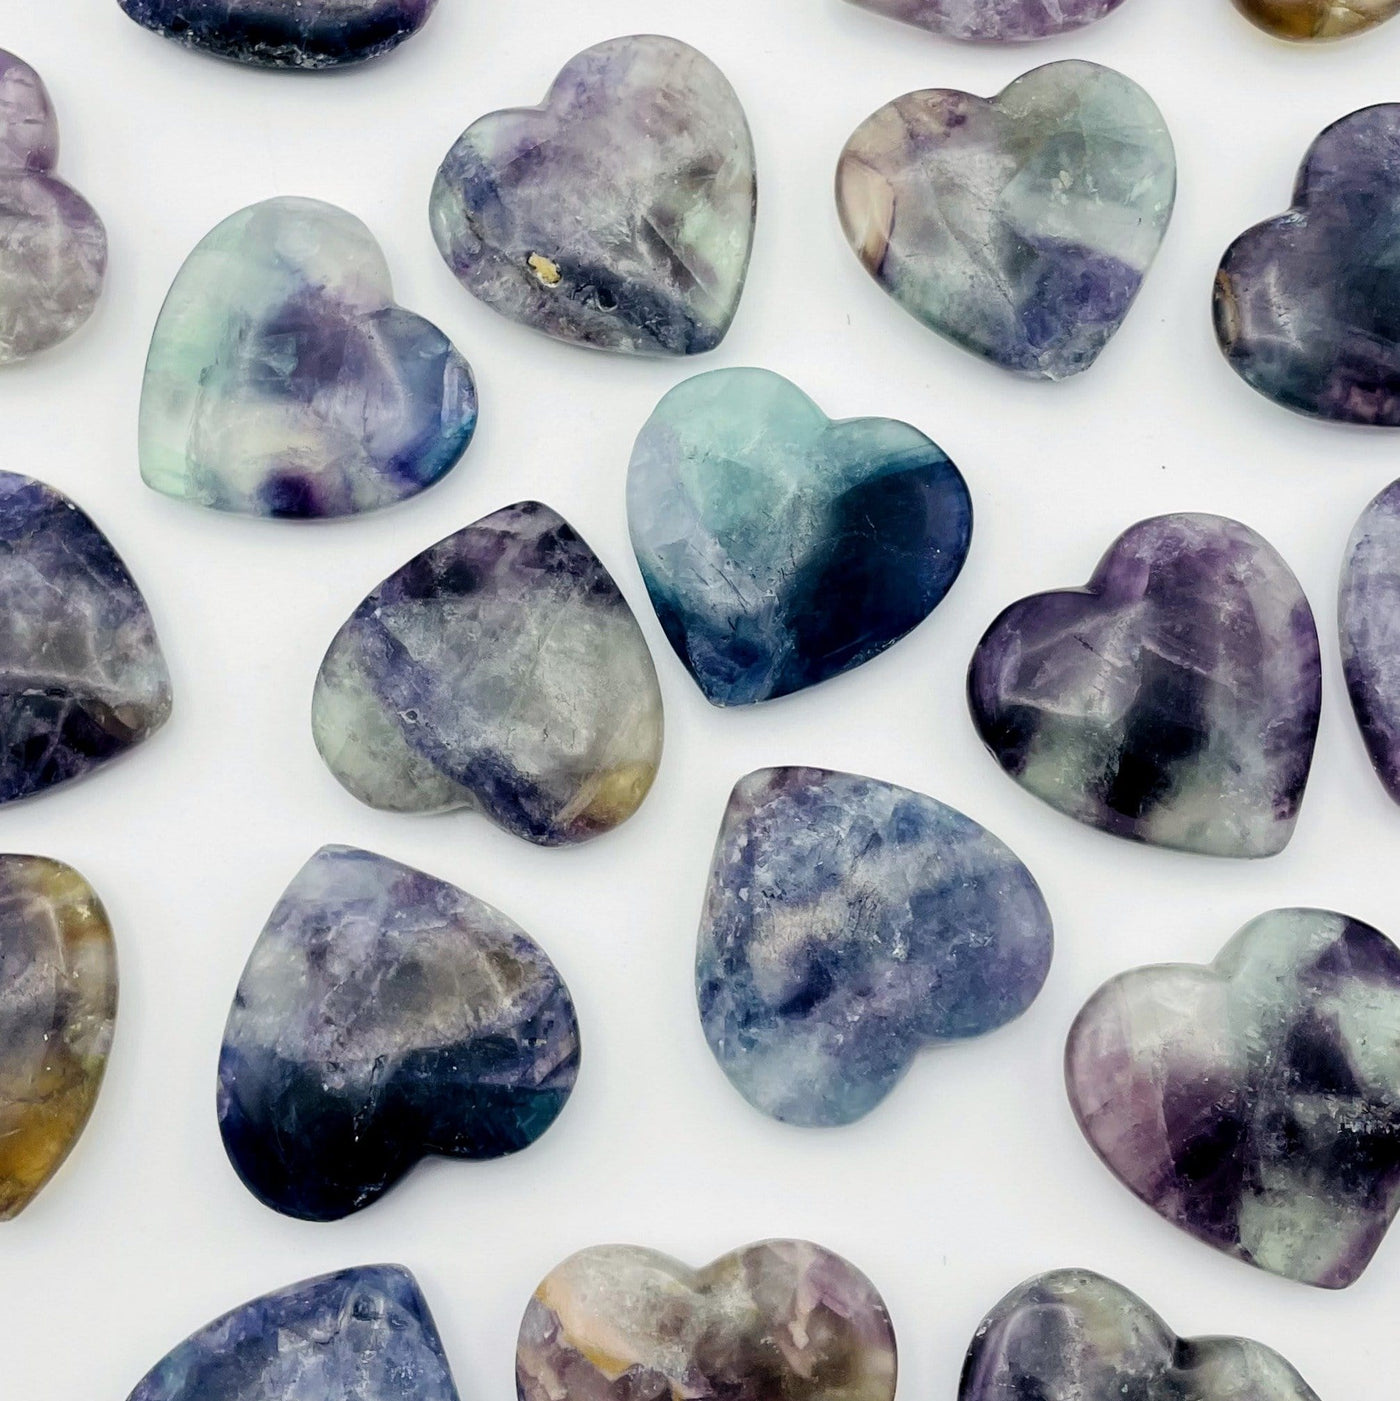 Fluorite Heart shapes displayed to view different color and characteristics